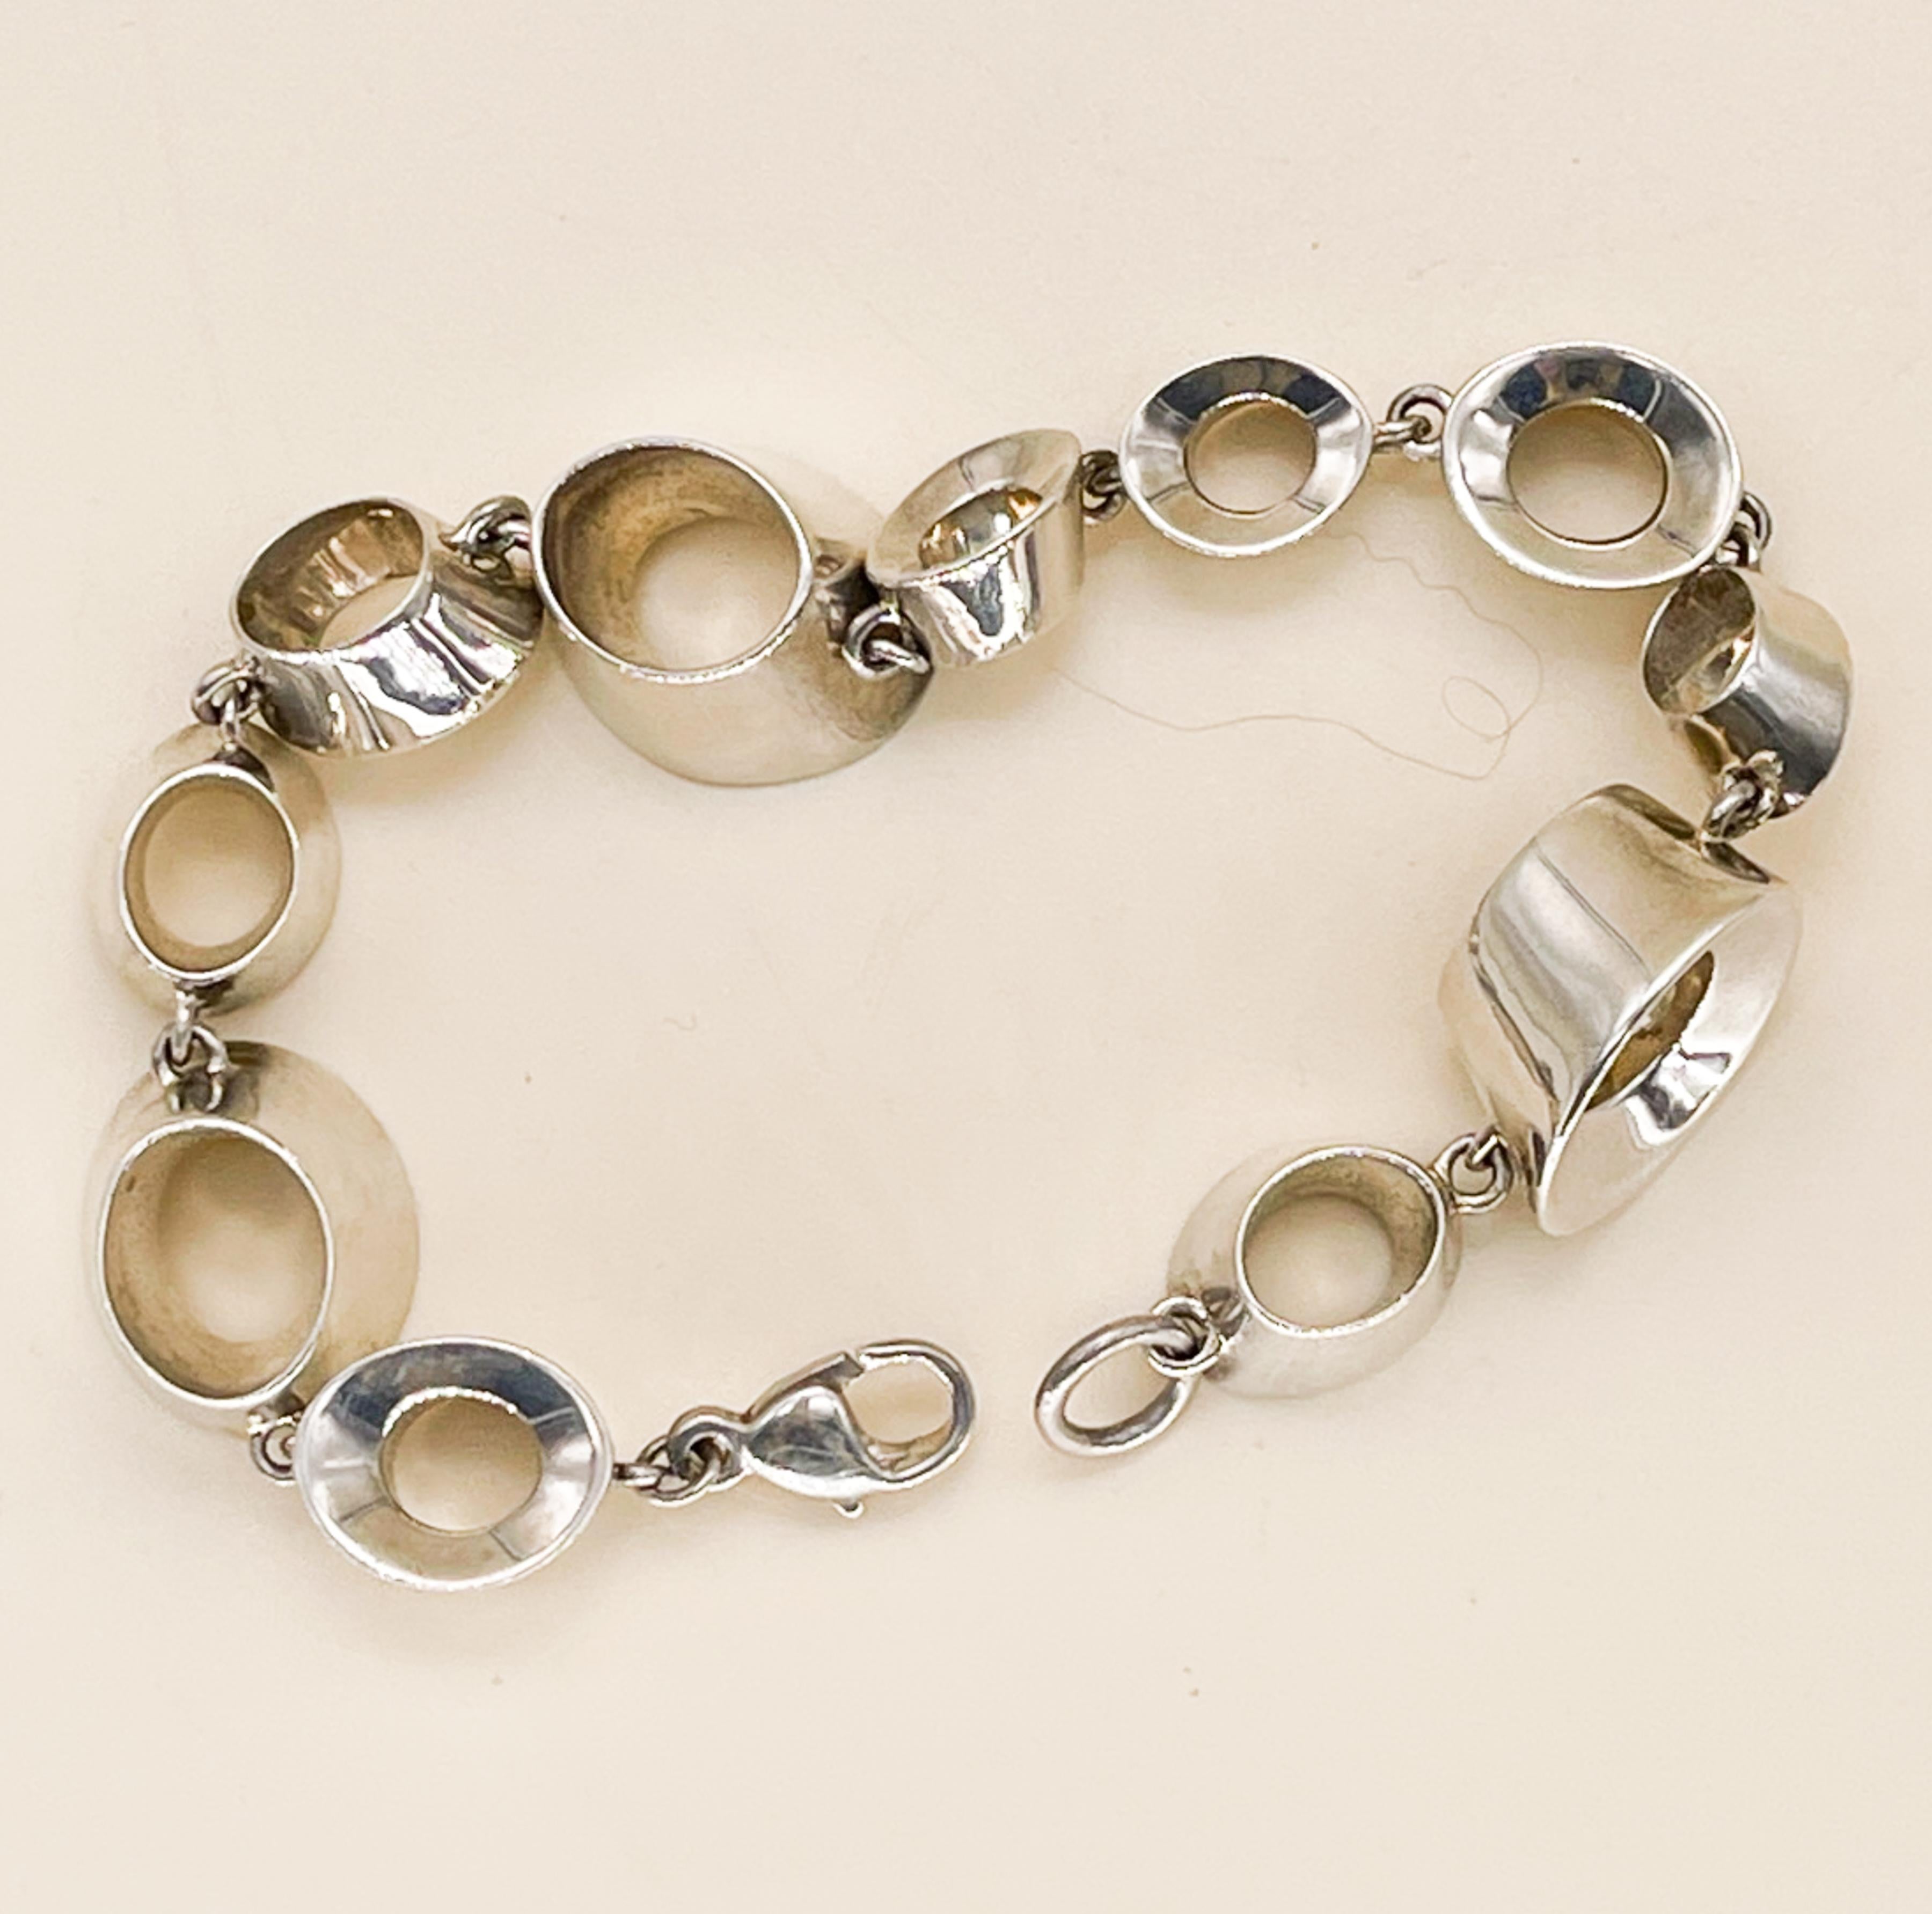 Frank Gehry Fot Tiffany & Co. Morph Bracelet In Excellent Condition For Sale In Watertown, MA